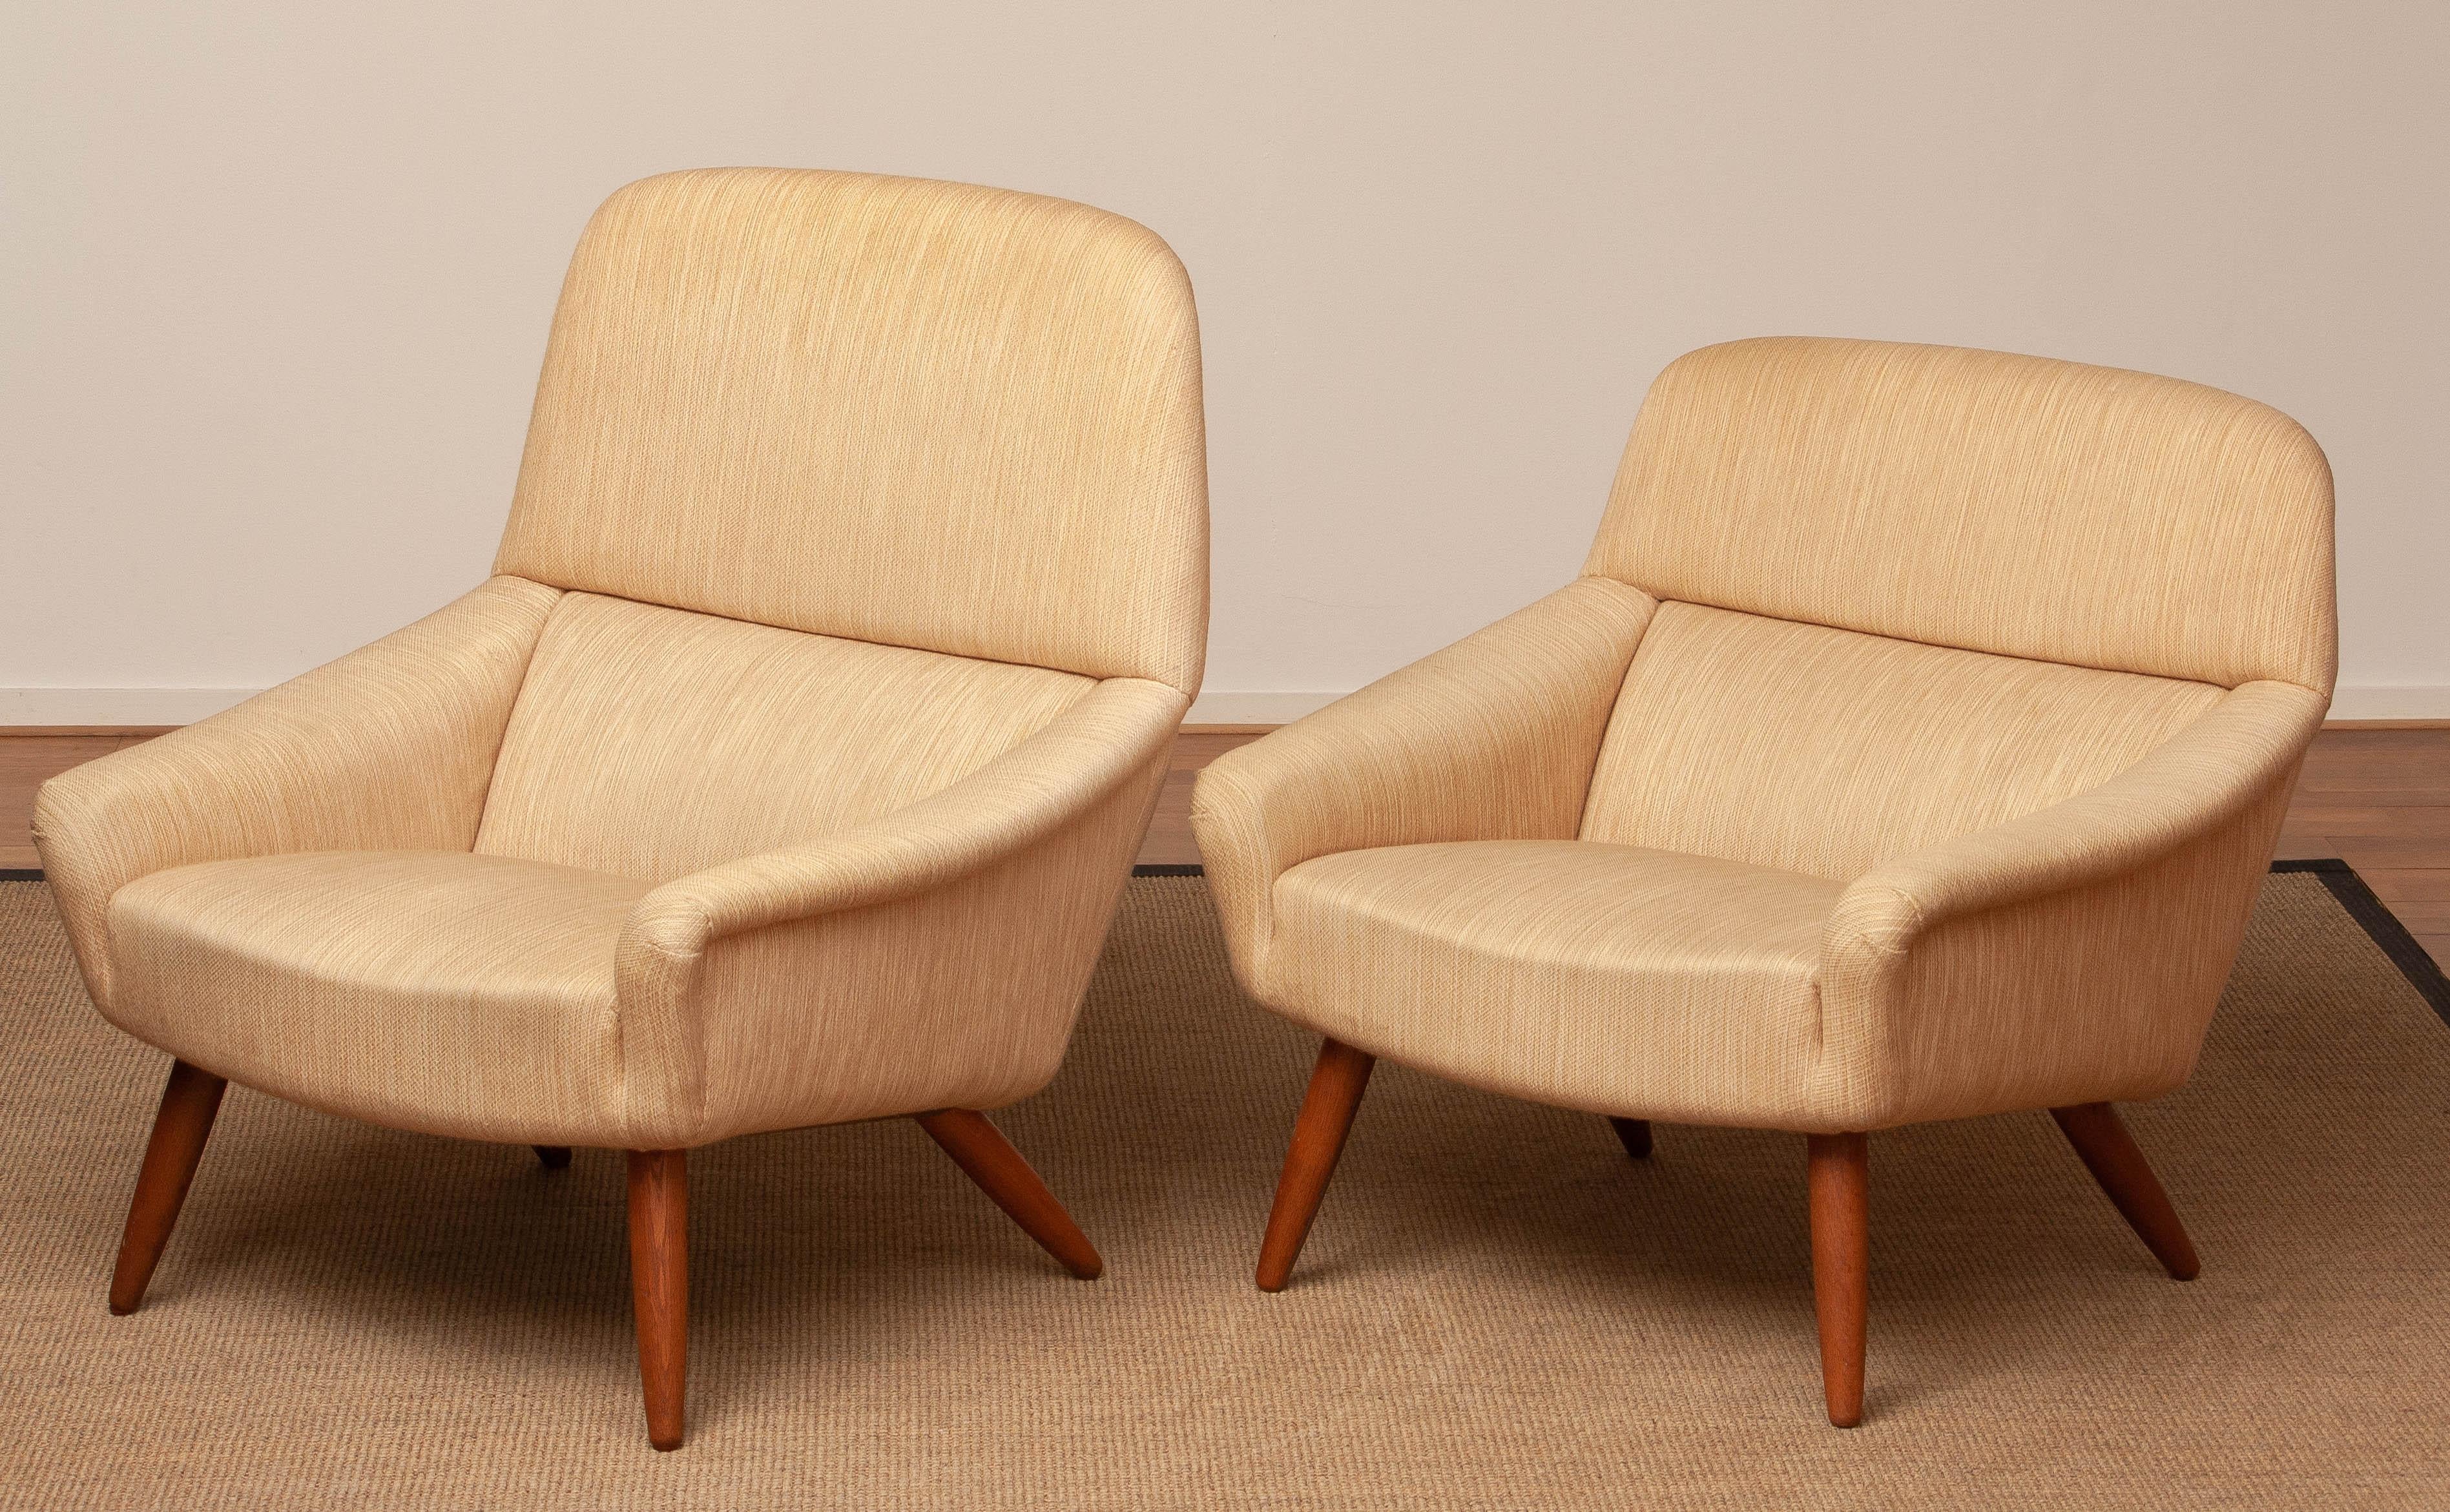 1960s Pair Wool and Oak Lounge Chairs by Leif Hansen for Kronen in Denmark For Sale 8